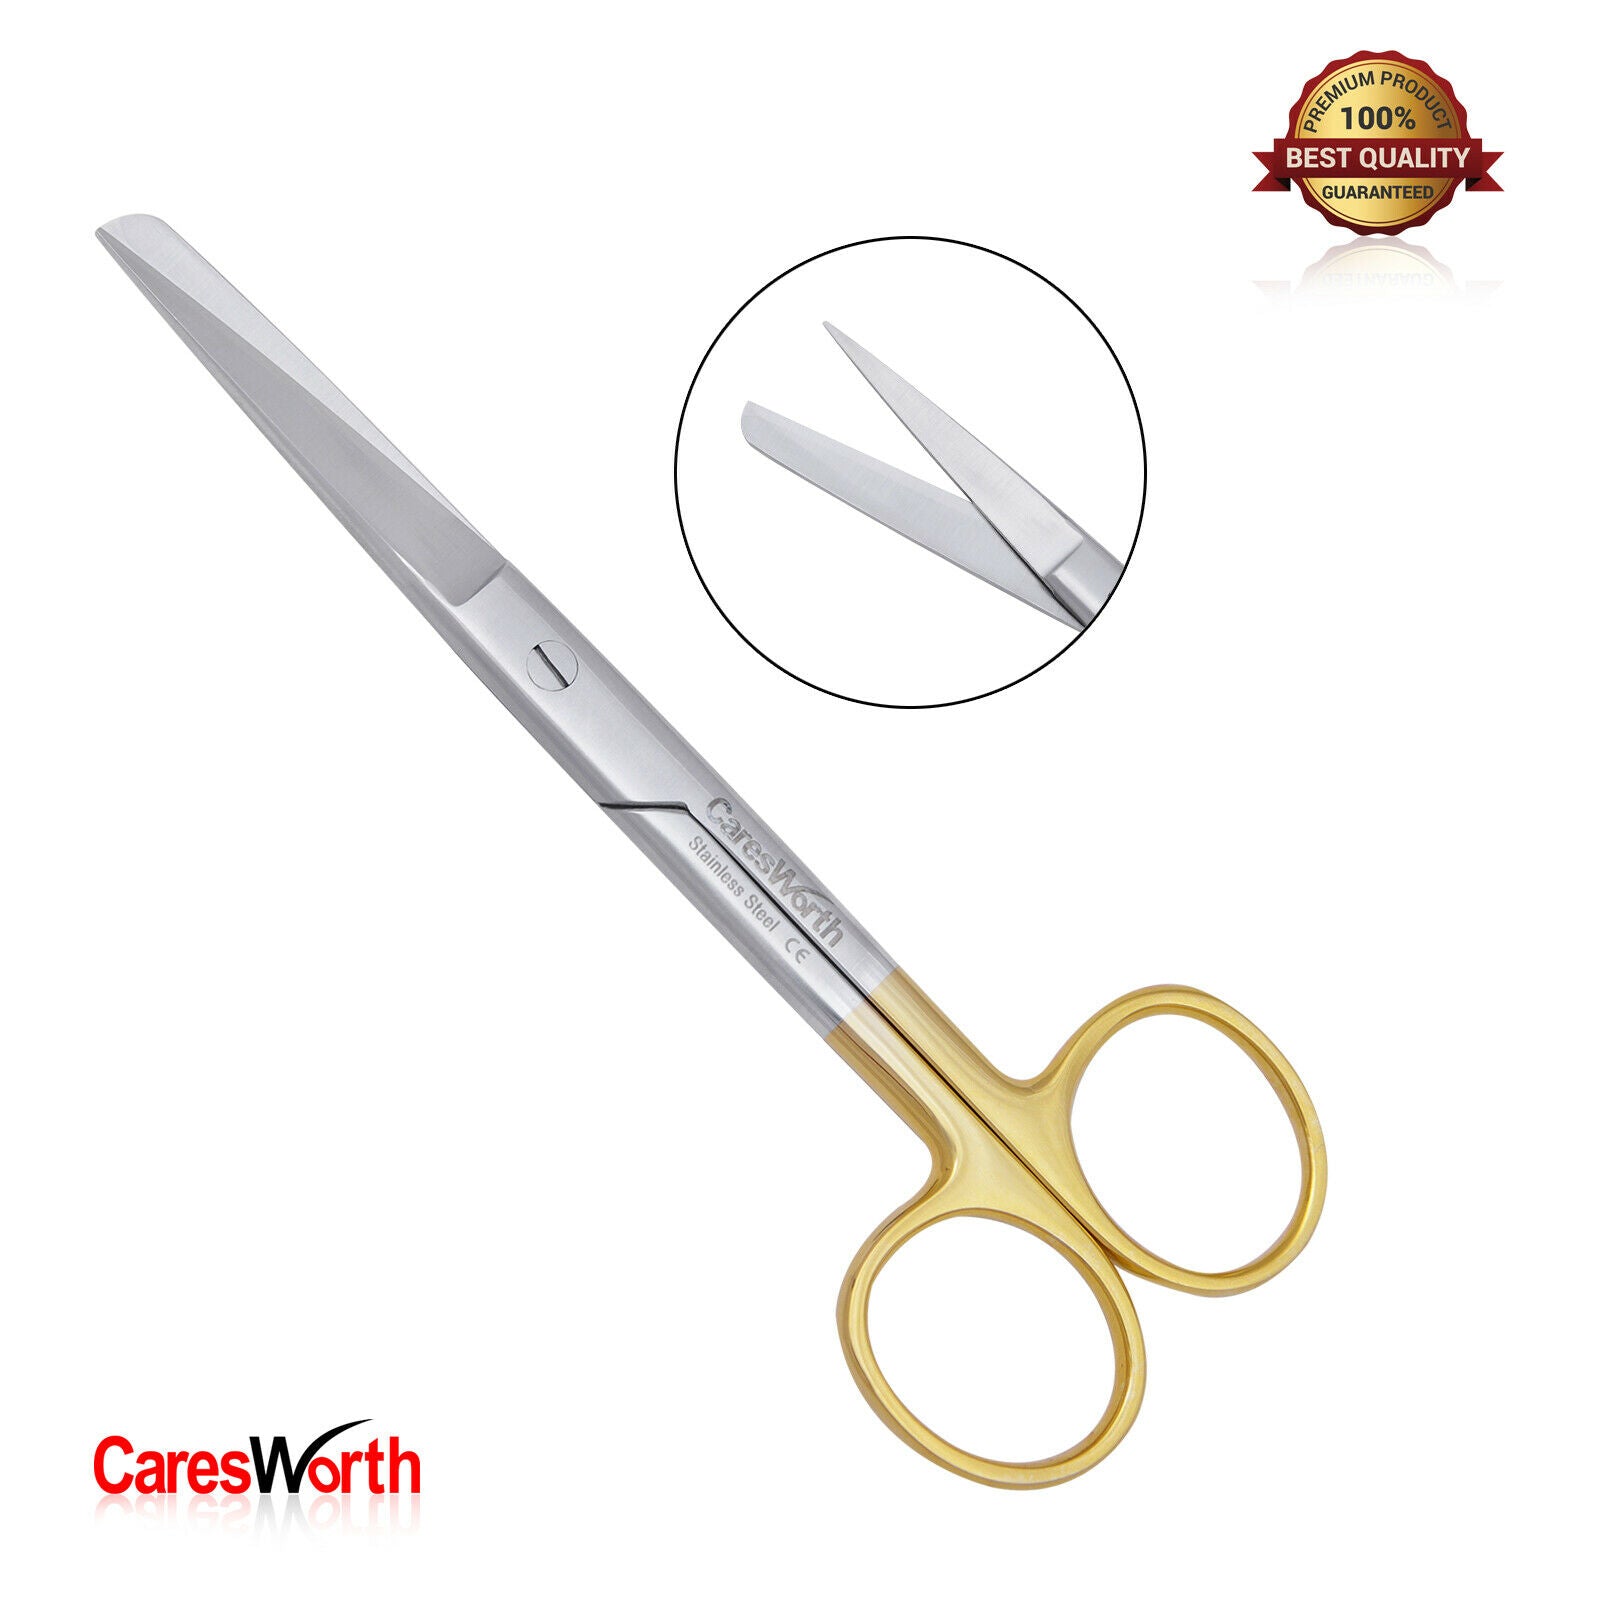 Surgical Scissors Straight Sharp/Blunt with Tungsten Carbide Inserts Stainless Steel 14.5cm Dissecting Surgical Veterinary Tool